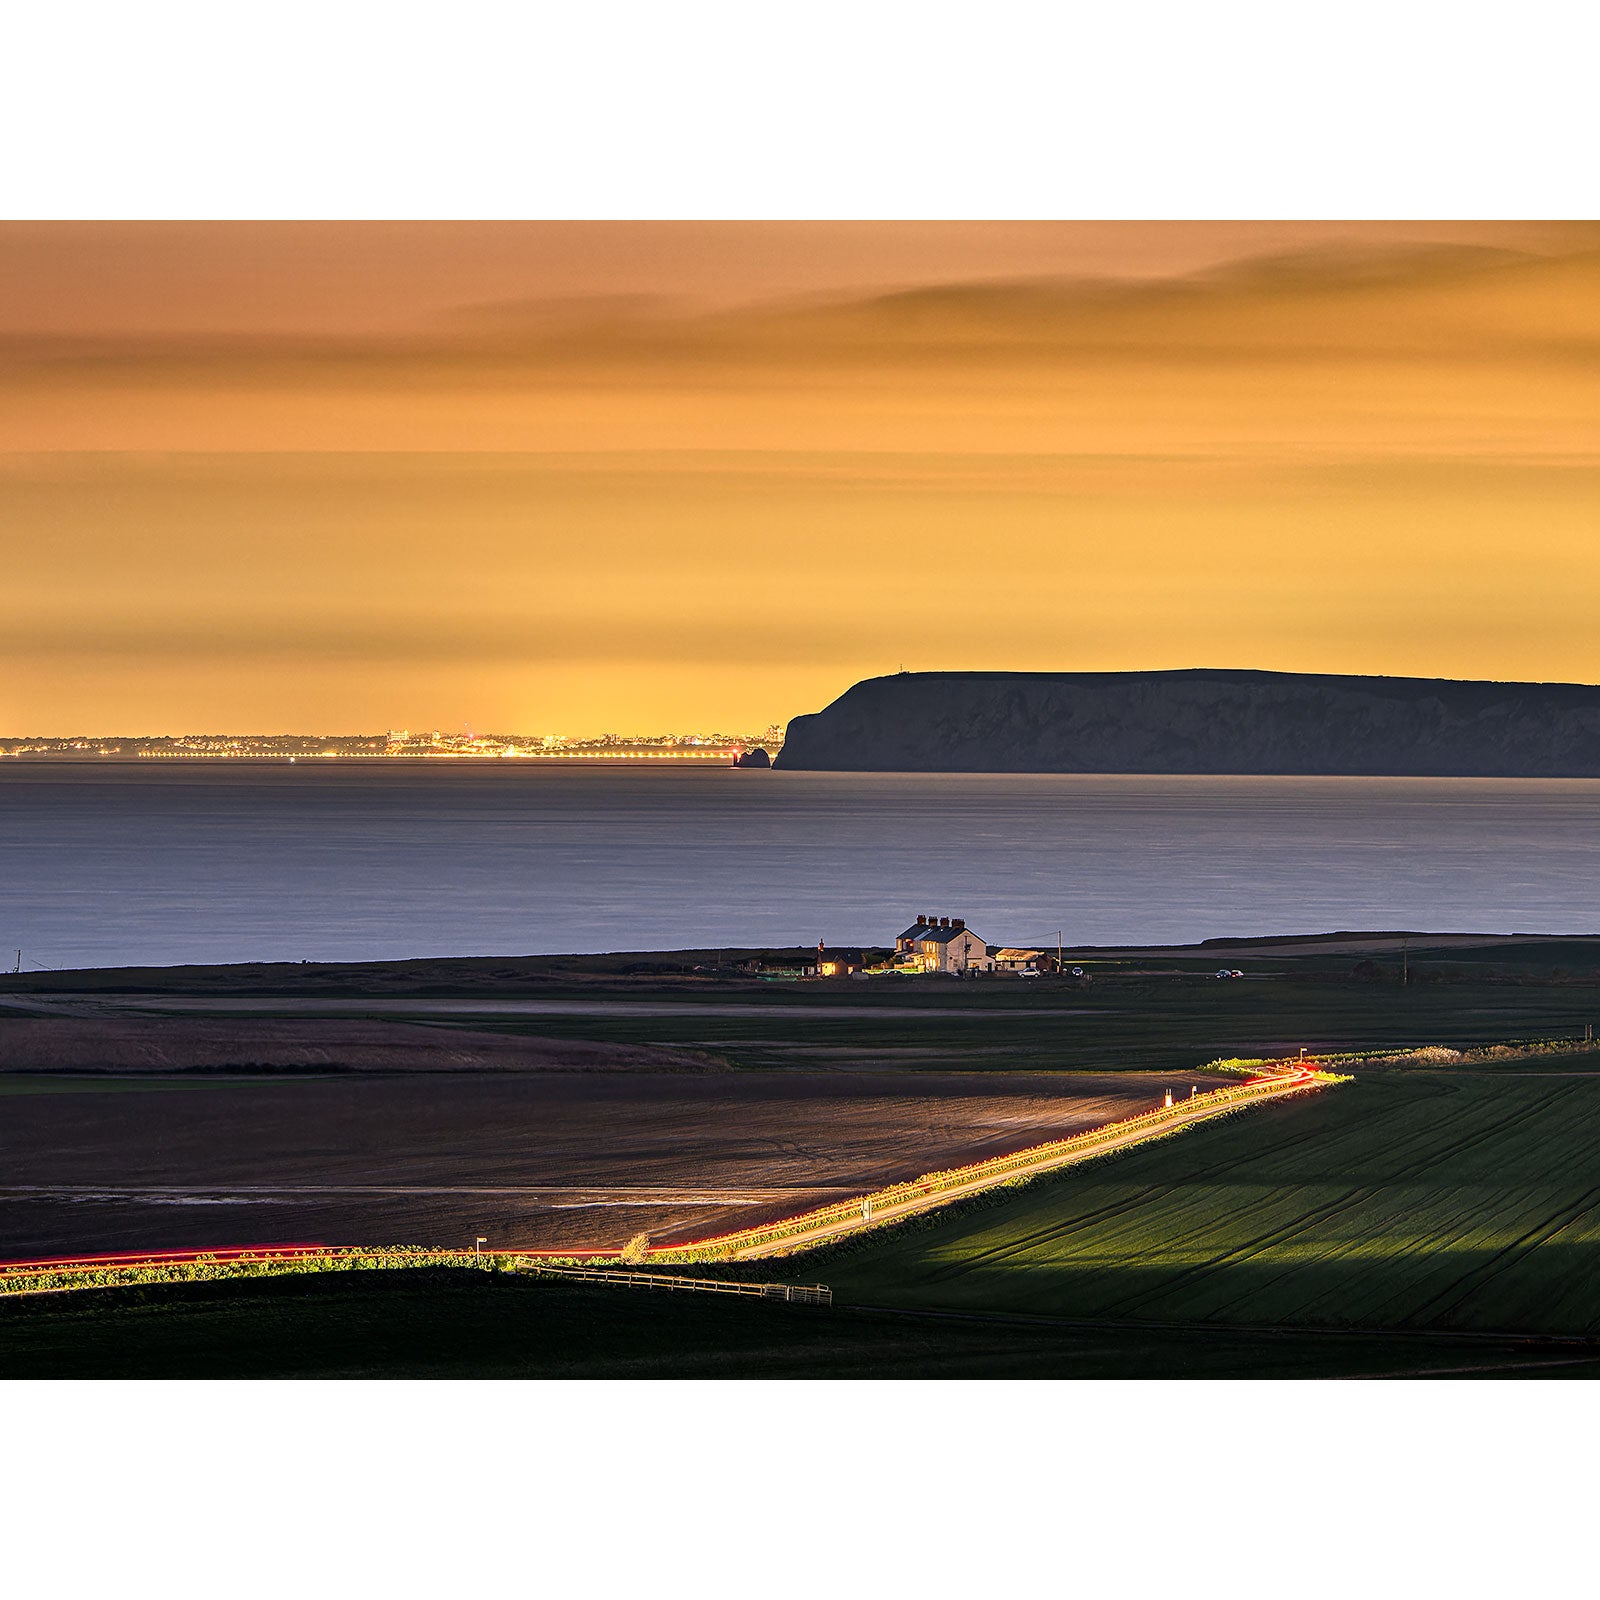 A serene landscape at dusk on the Isle of Wight with layers of farmland, a small building in the foreground, and a cliff in the distance under a gradient sunset sky captured by Looking toward The Needles by Available Light Photography.